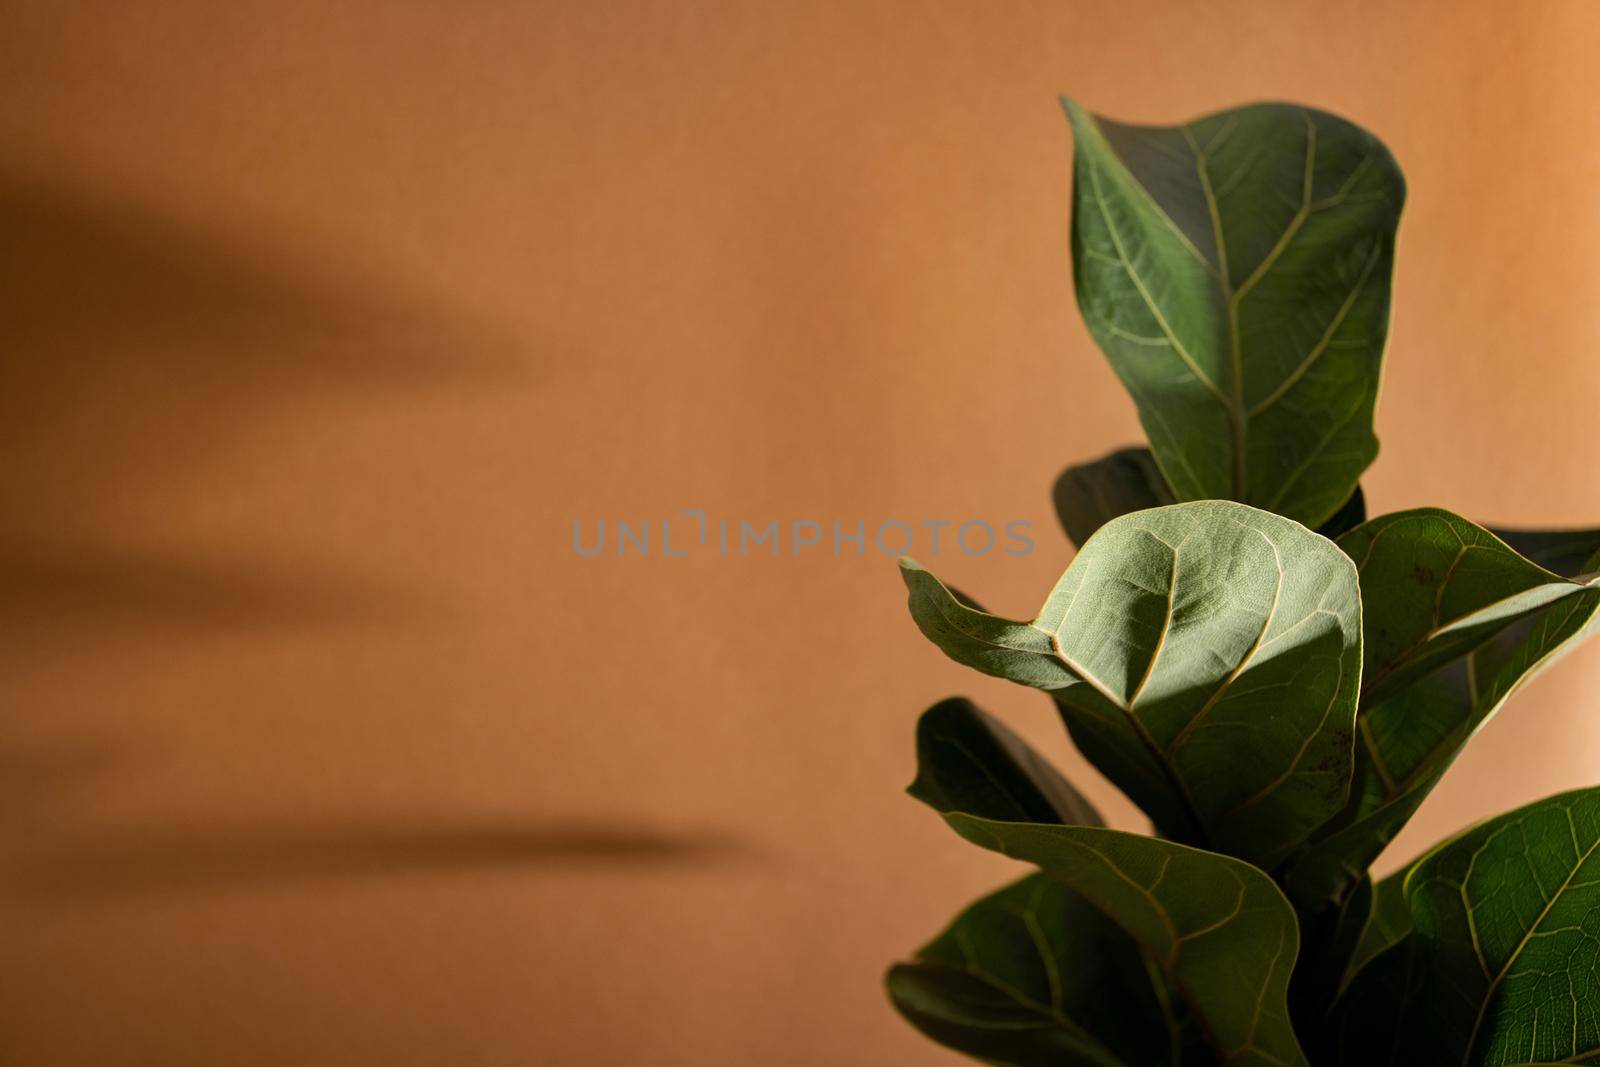 Green leaves of Fiddle Fig or Ficus Lyrata. Fiddle-leaf fig tree the popular ornamental tropical houseplant on brown background,, Air purifying plants for home, Houseplants With Health Benefits side view